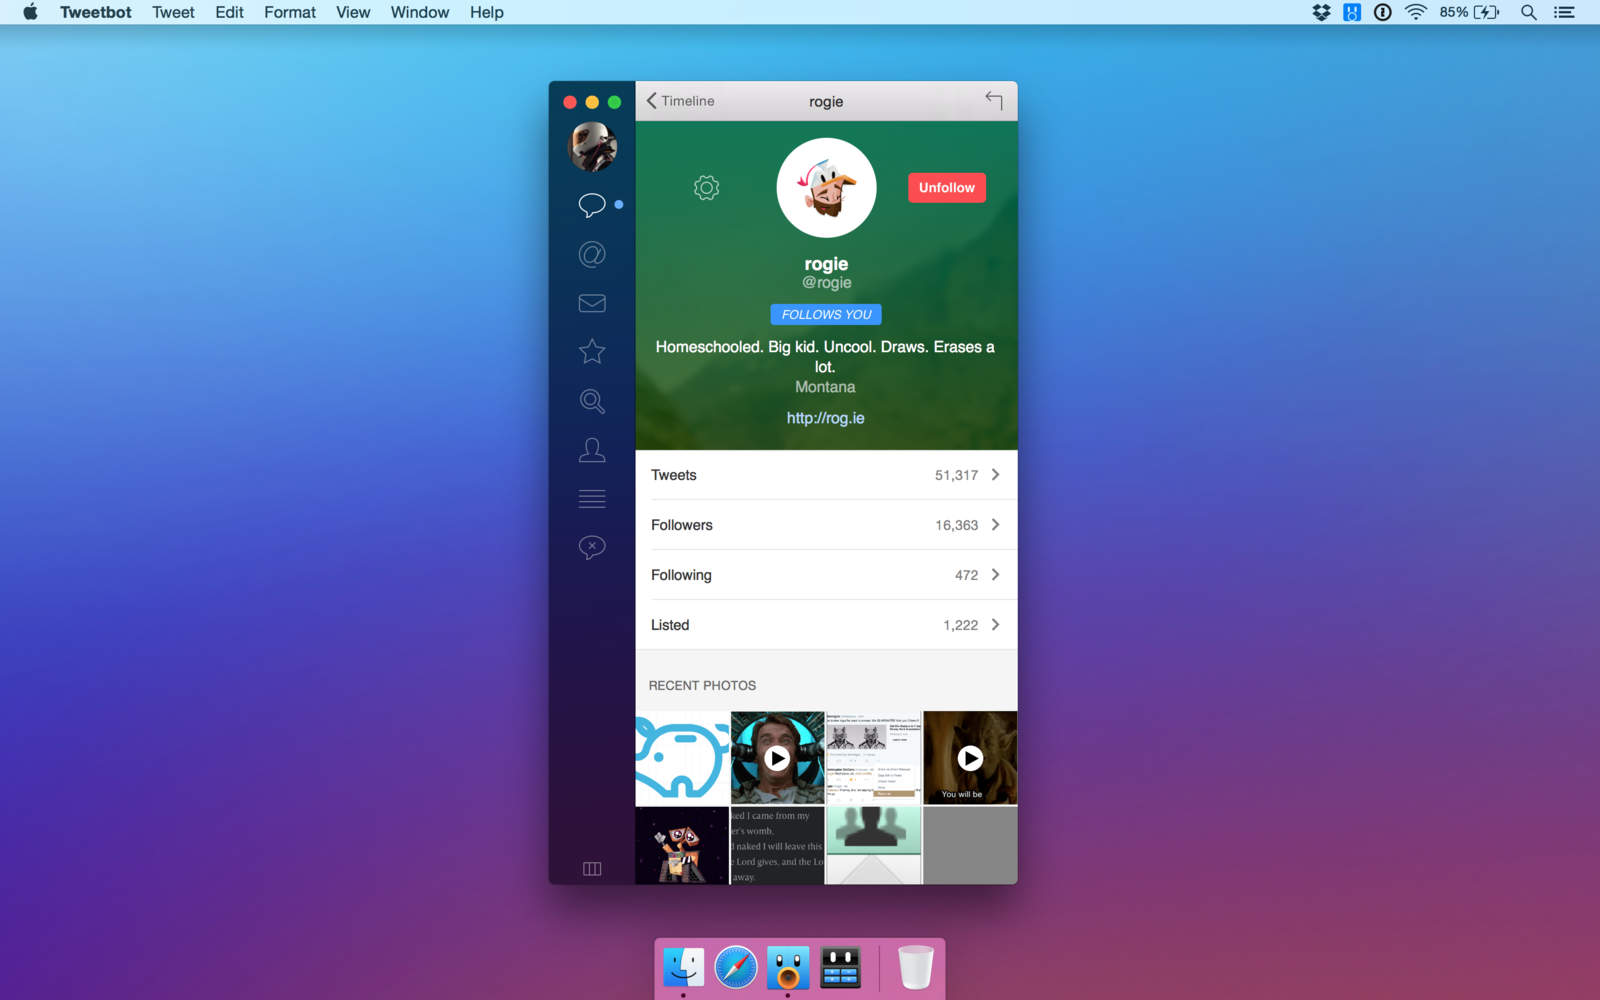 download unetbootin for mac